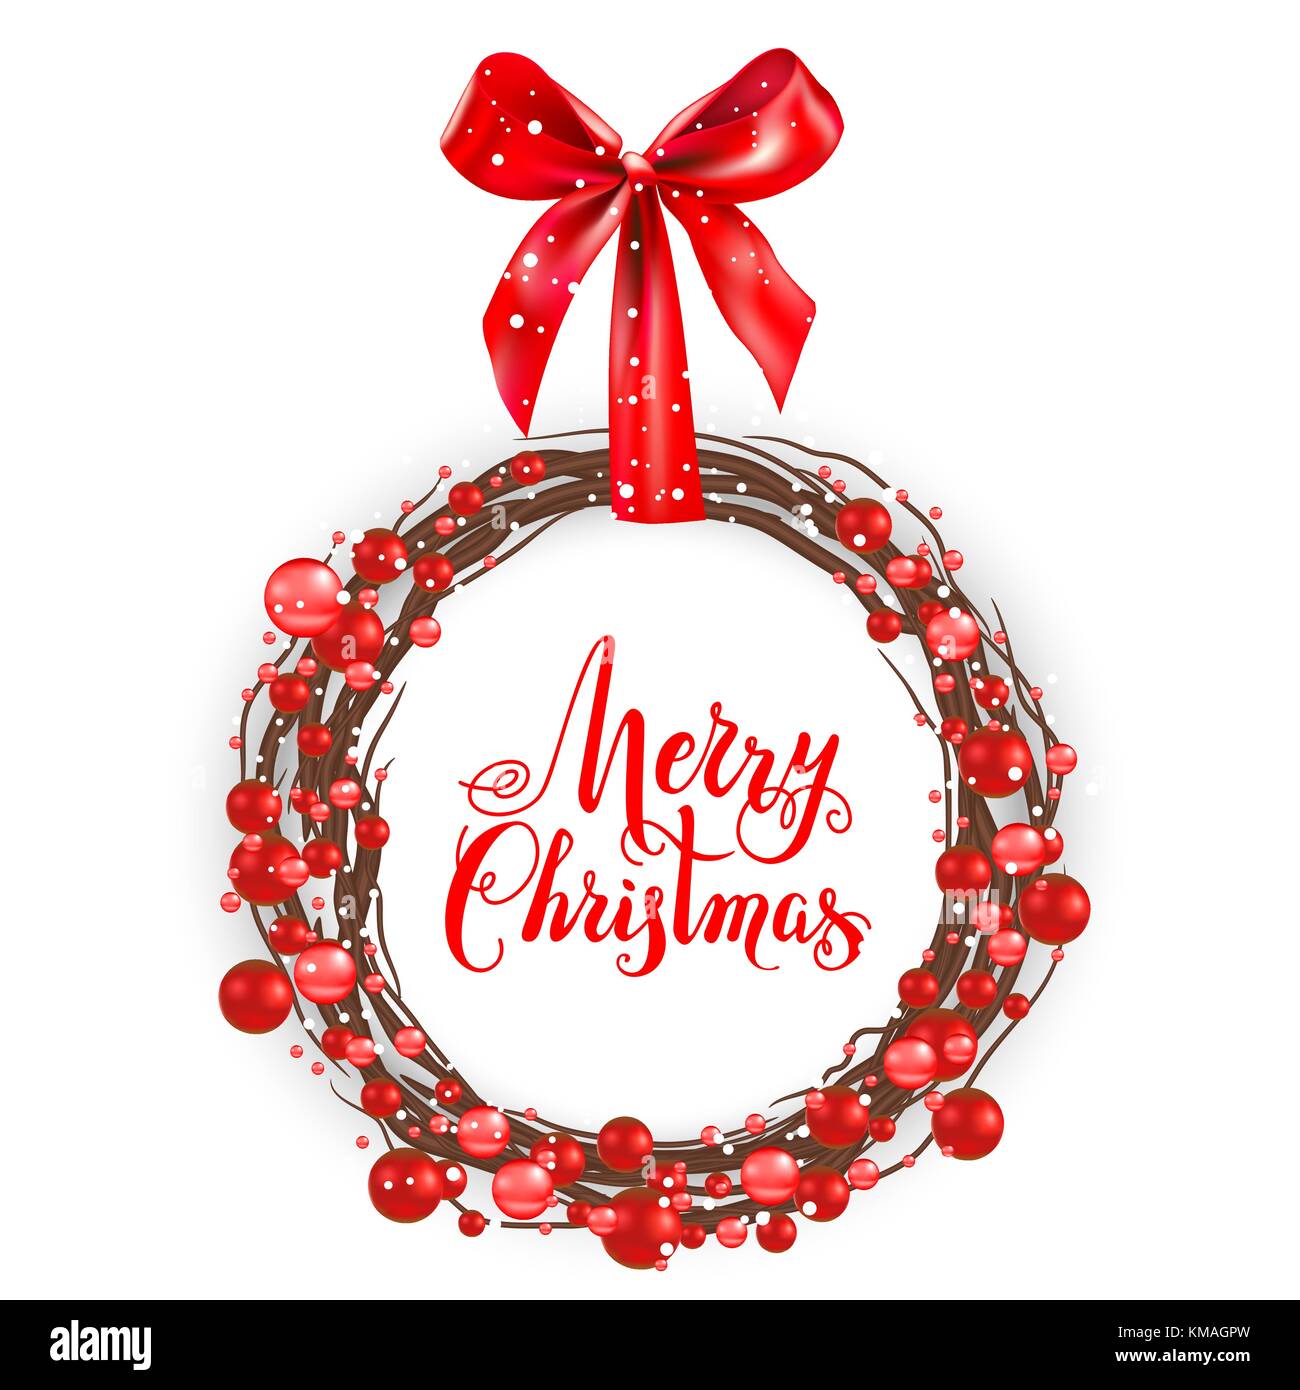 Christmas red berry wreath Stock Vector